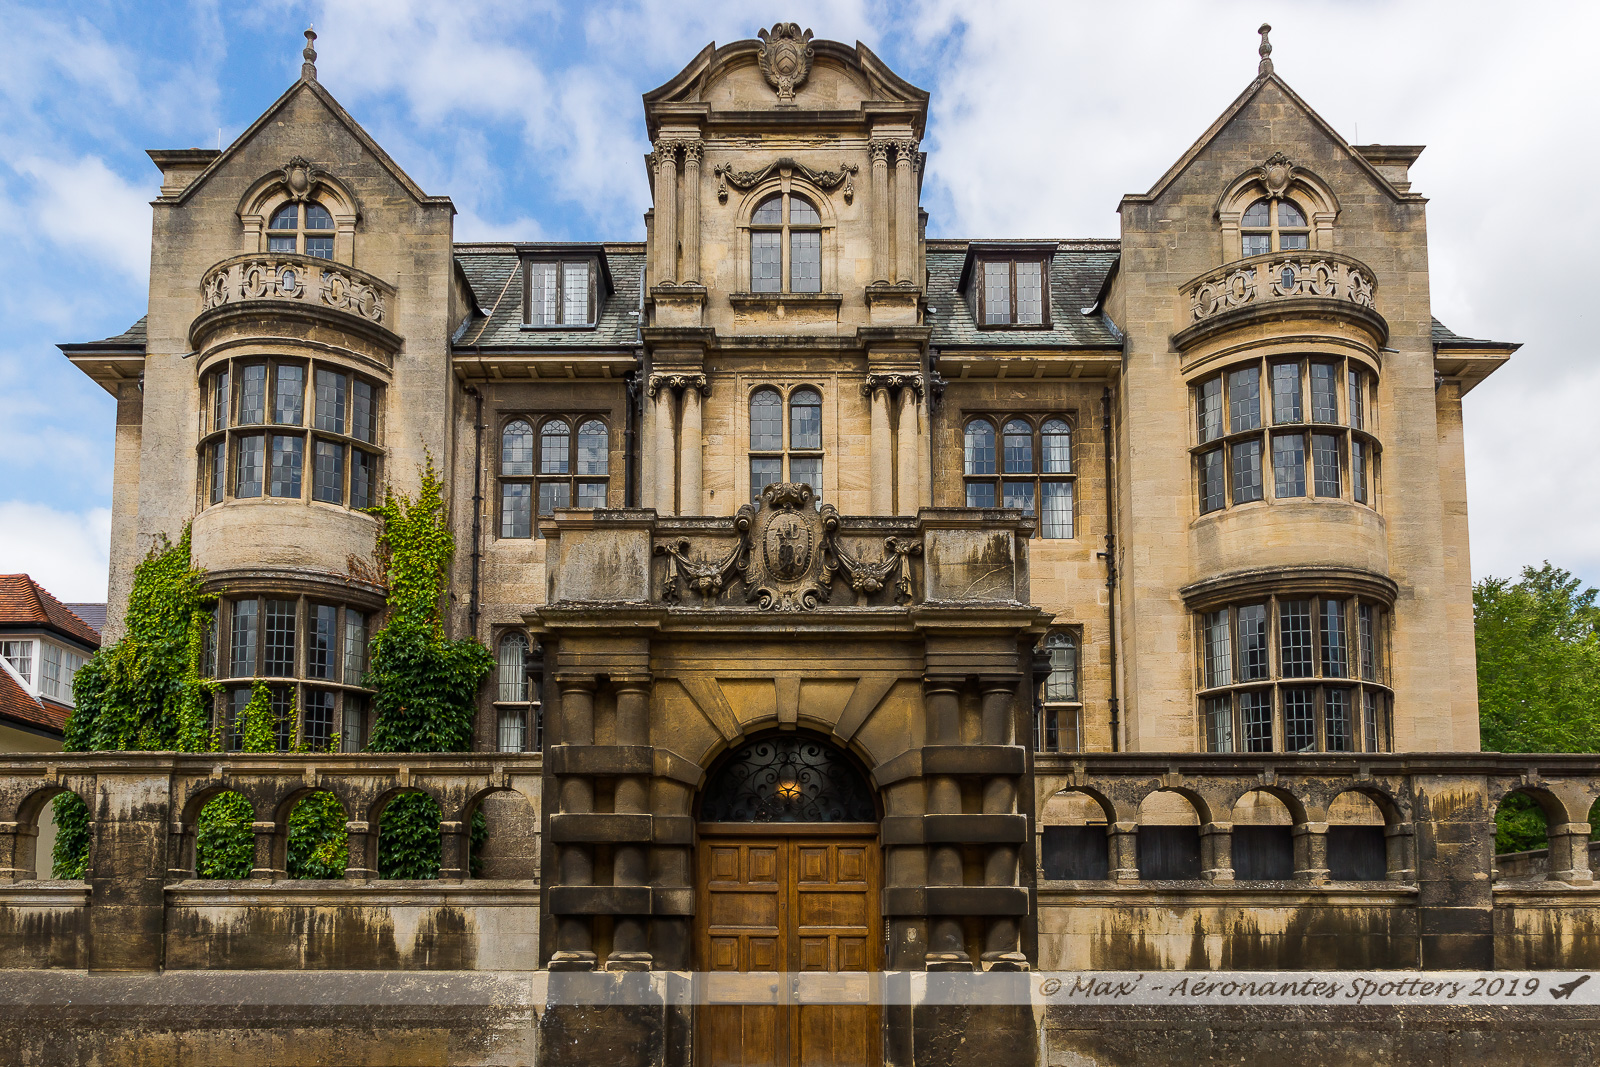 Oxford City - The Old Lodging of Merton College